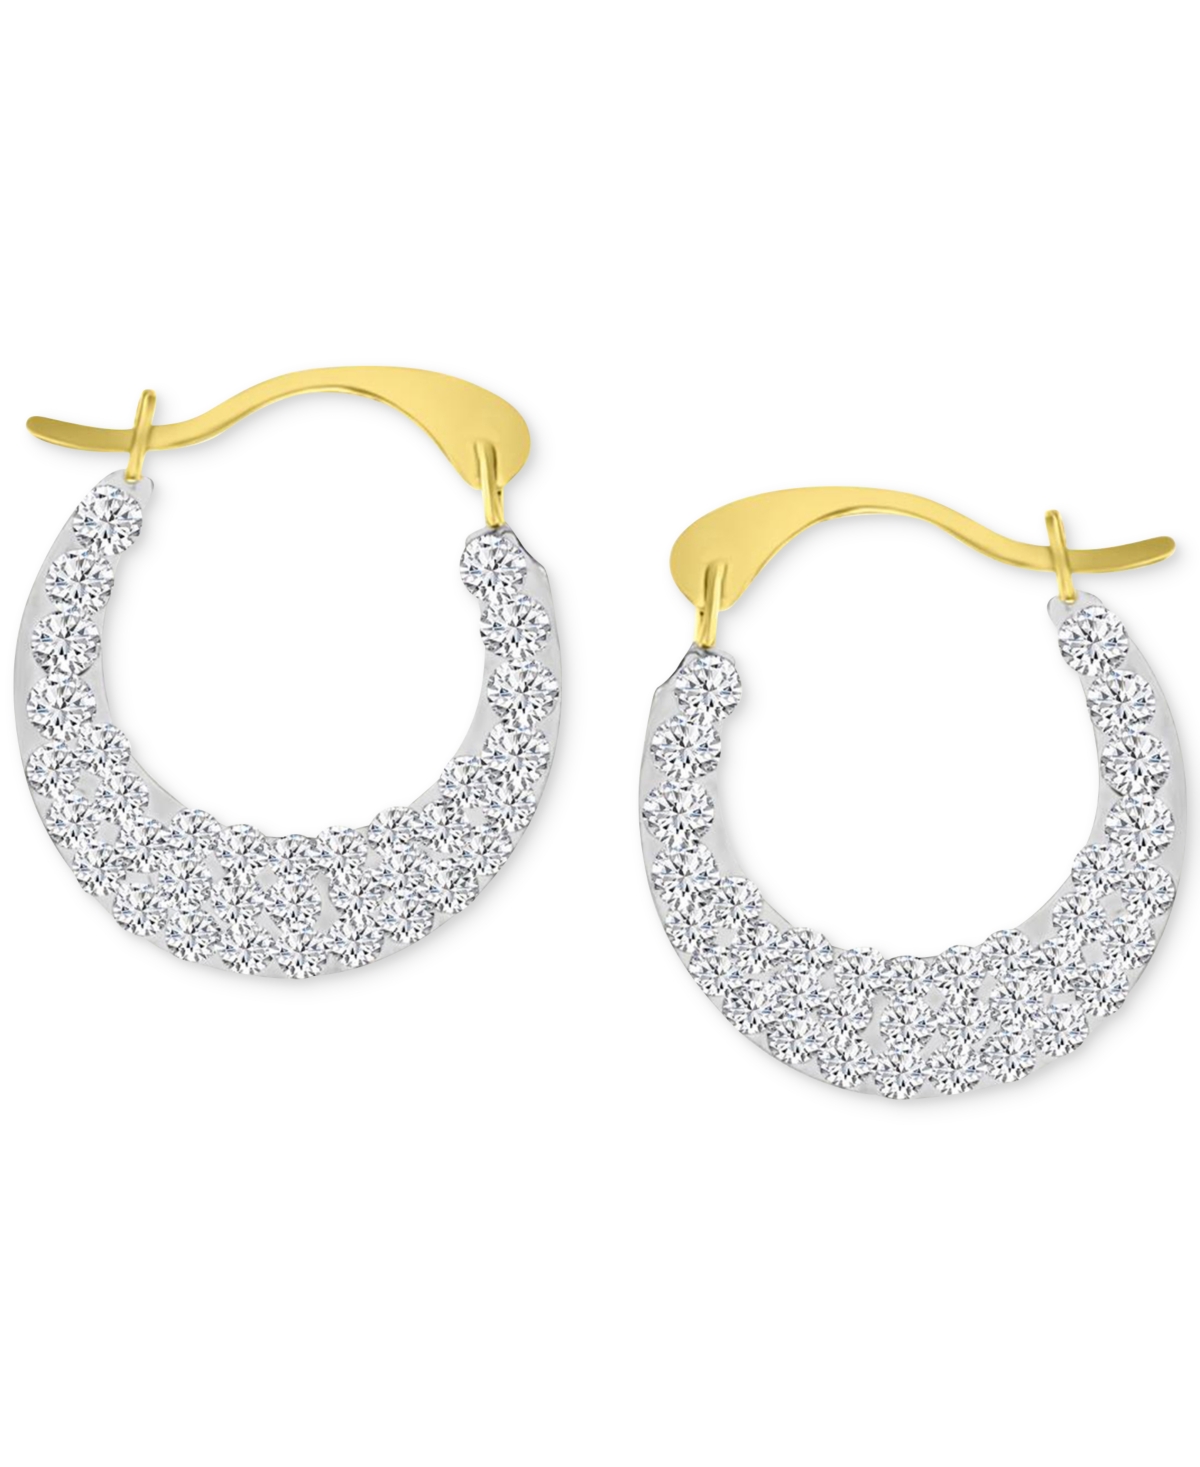 Crystal Pave Small Round Hoop Earrings in 10k Gold, 0.57" - Gold